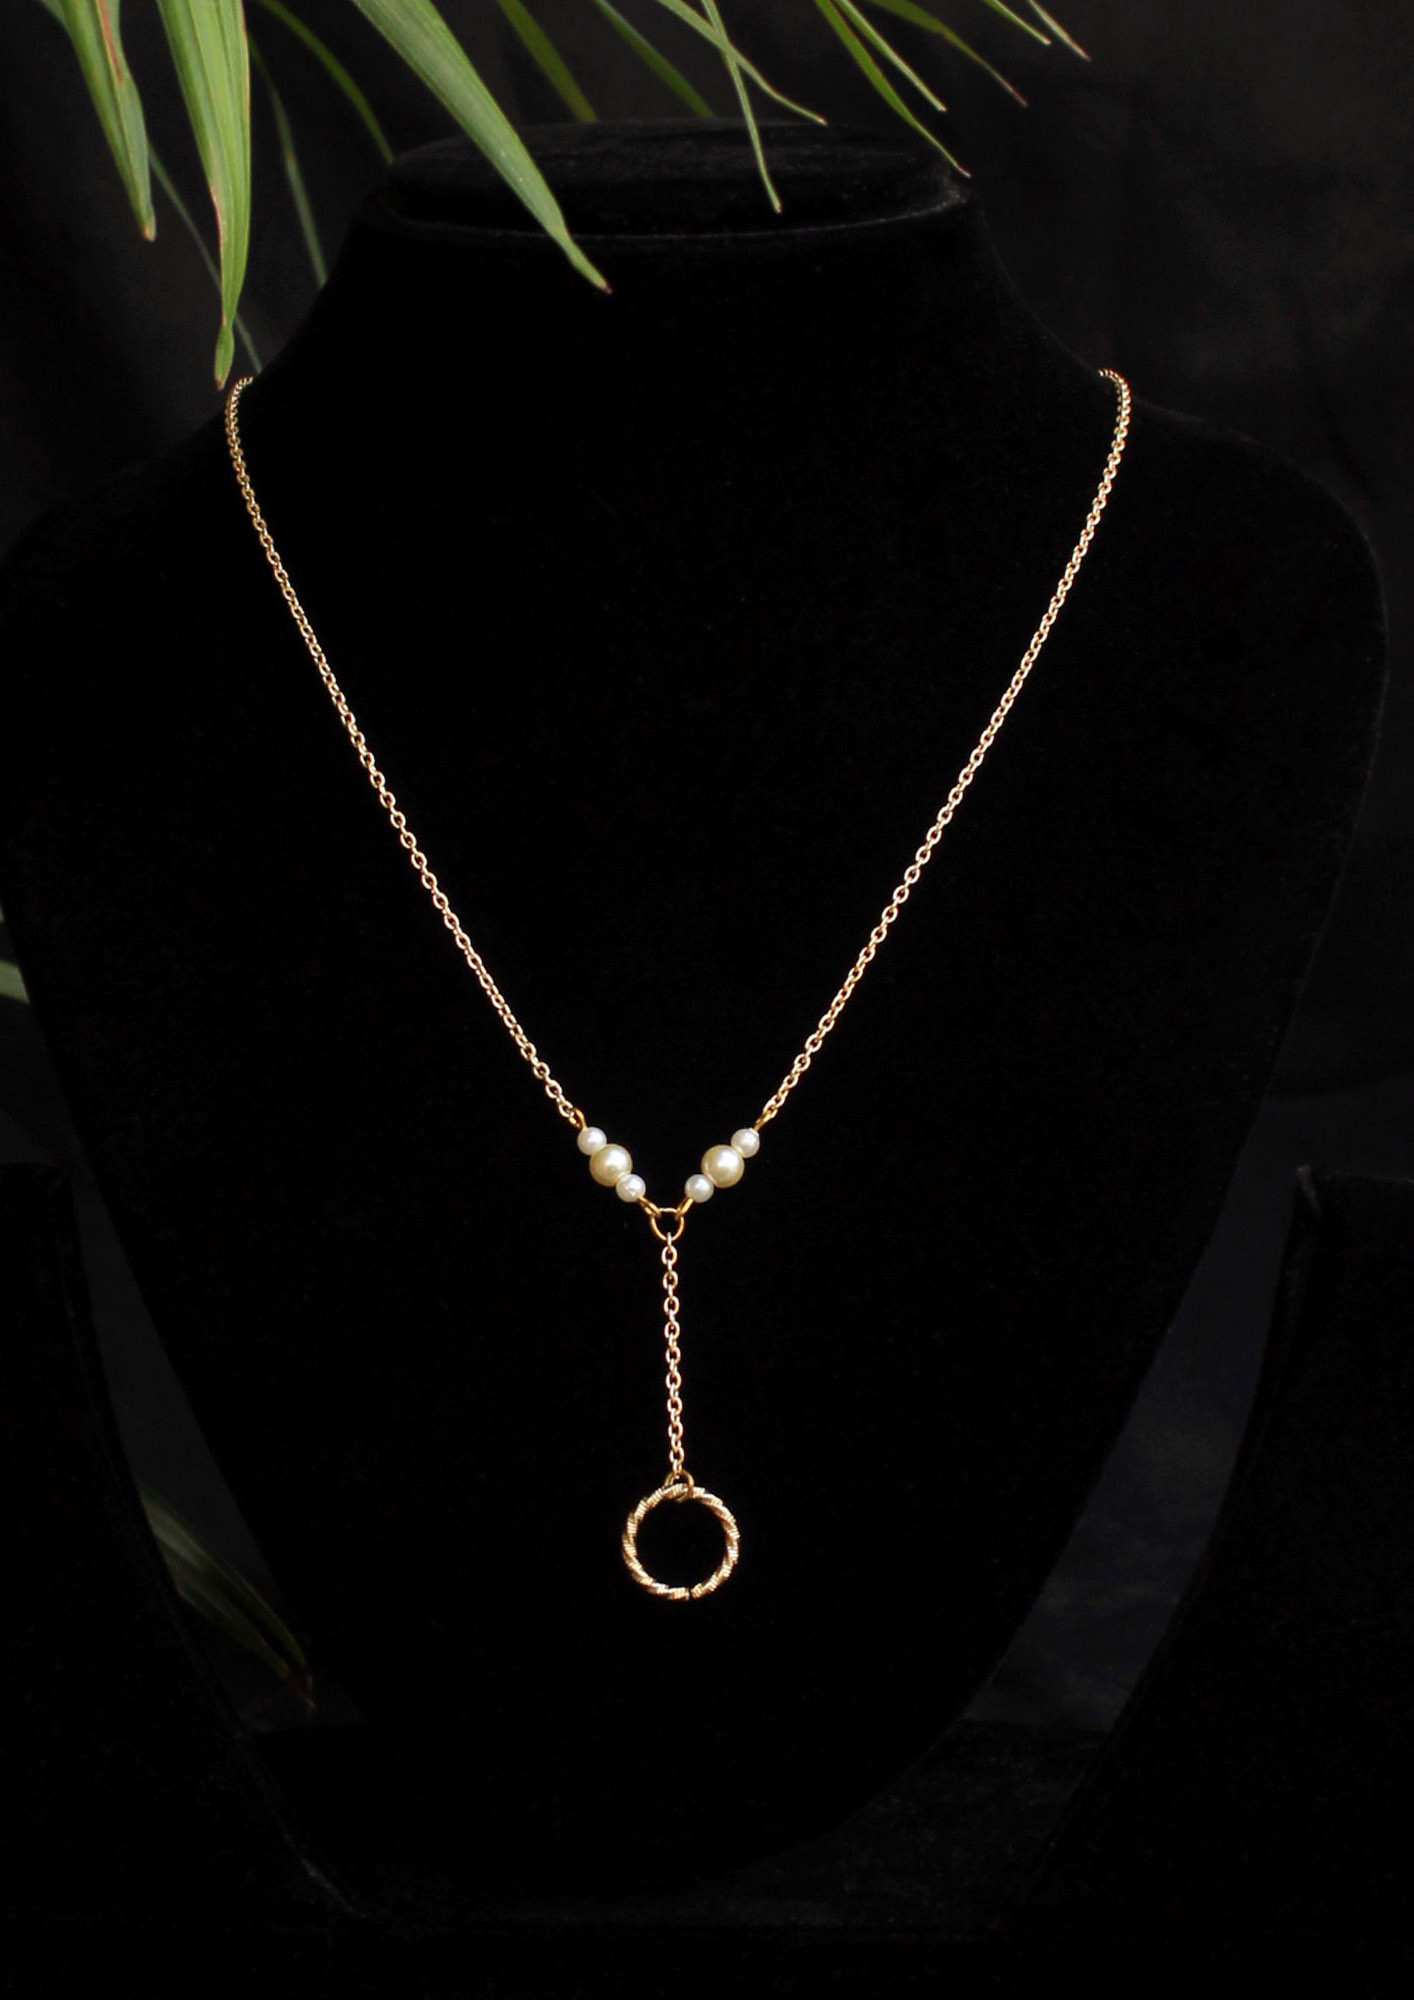 Lariat Necklace With A Ring Drop